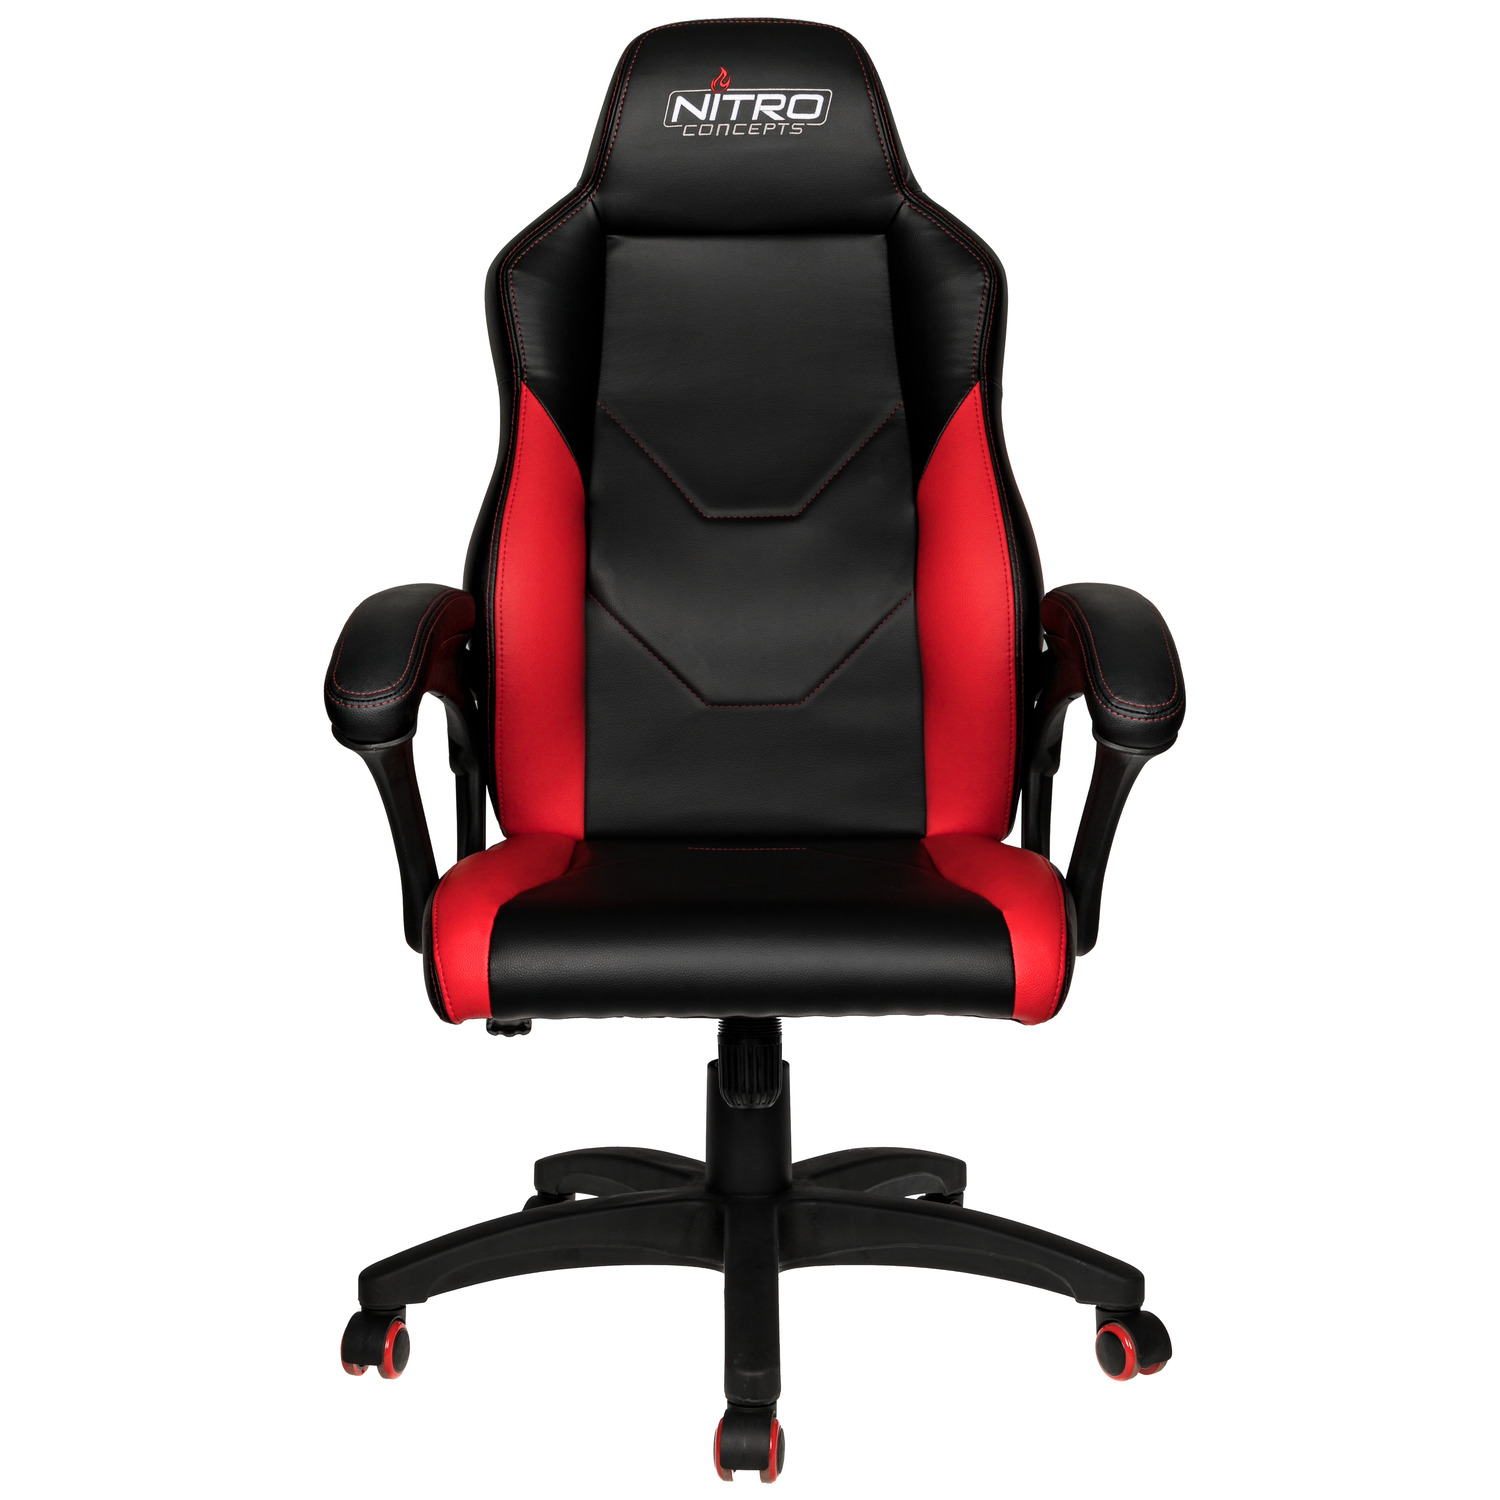  - C100 Gaming Chair Black/Red